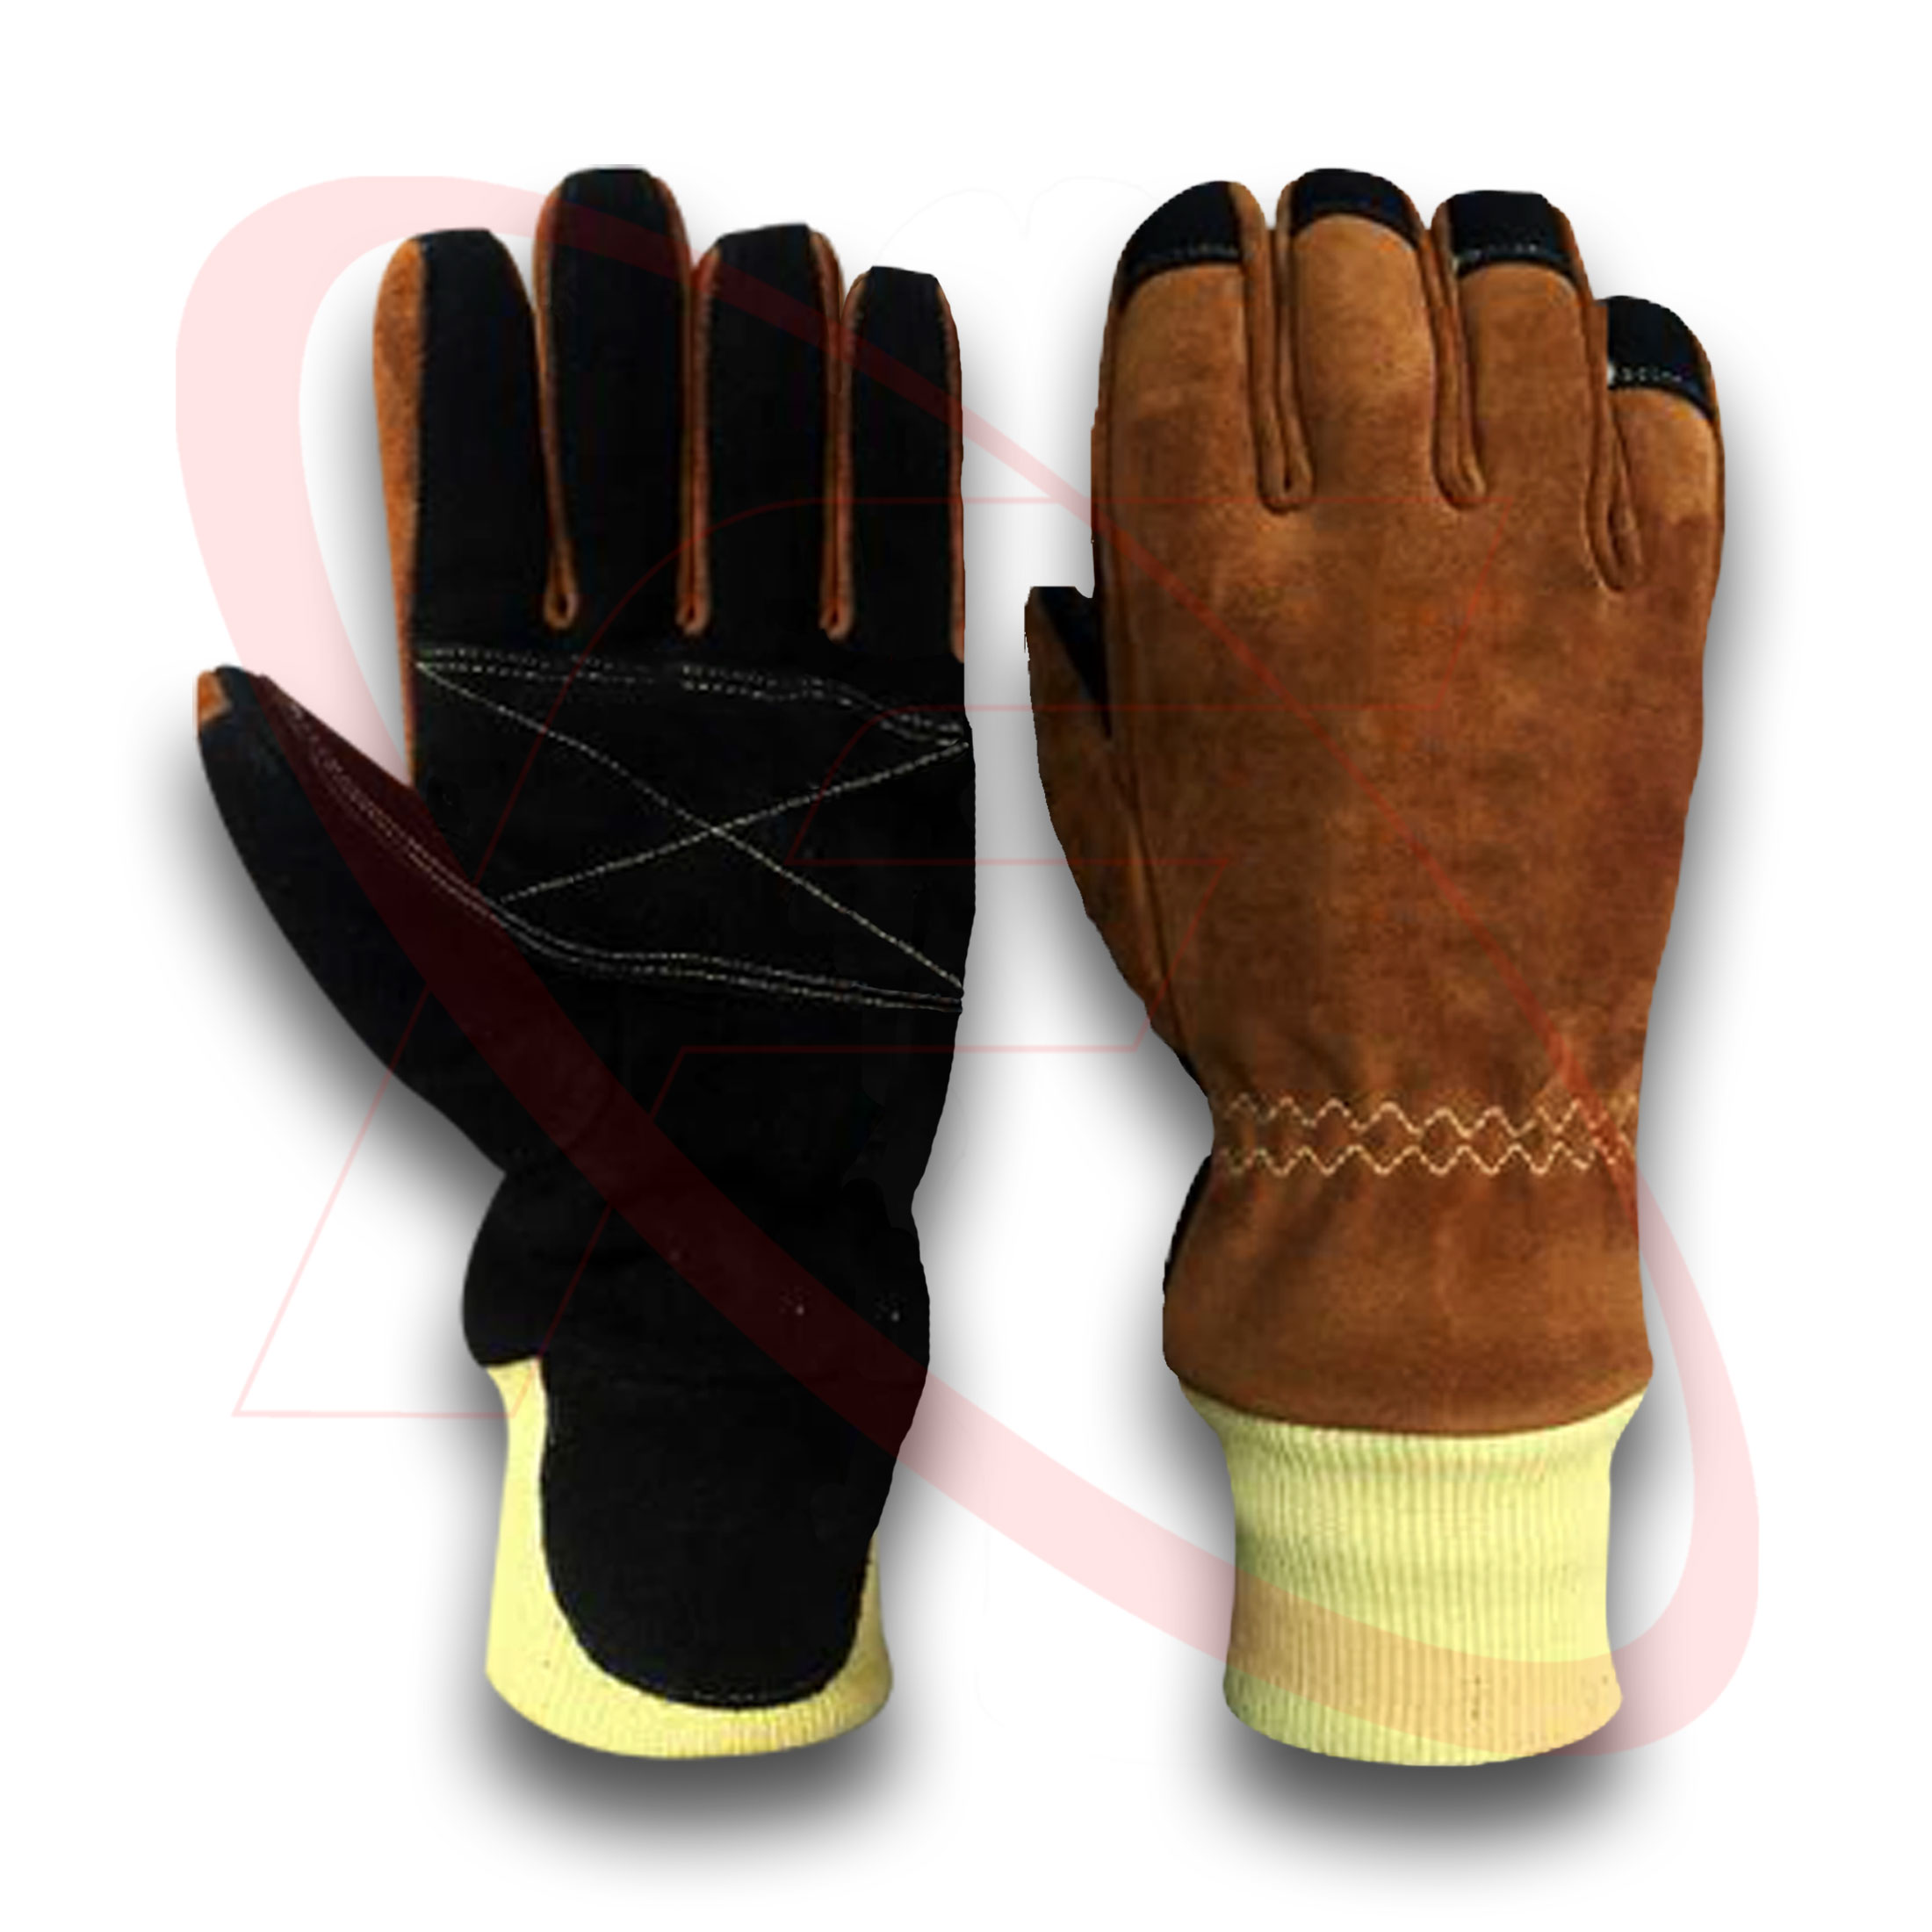 Best Quality Fire Fighter Gloves Cow Split Leather with Moisture Barer Fire Fighter Gloves For Fireman